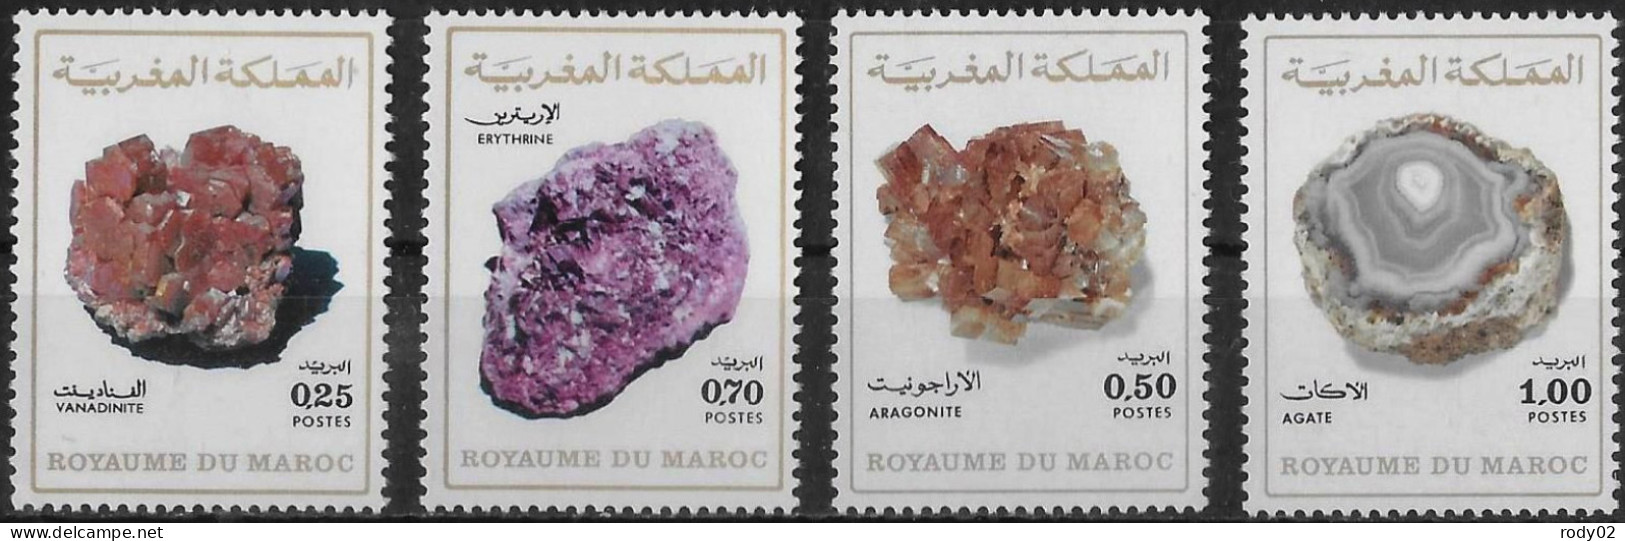 MAROC - ROCHES MINERALES - N° 698 A 699 ET 721 A 722 - NEUF** MNH - Minerals